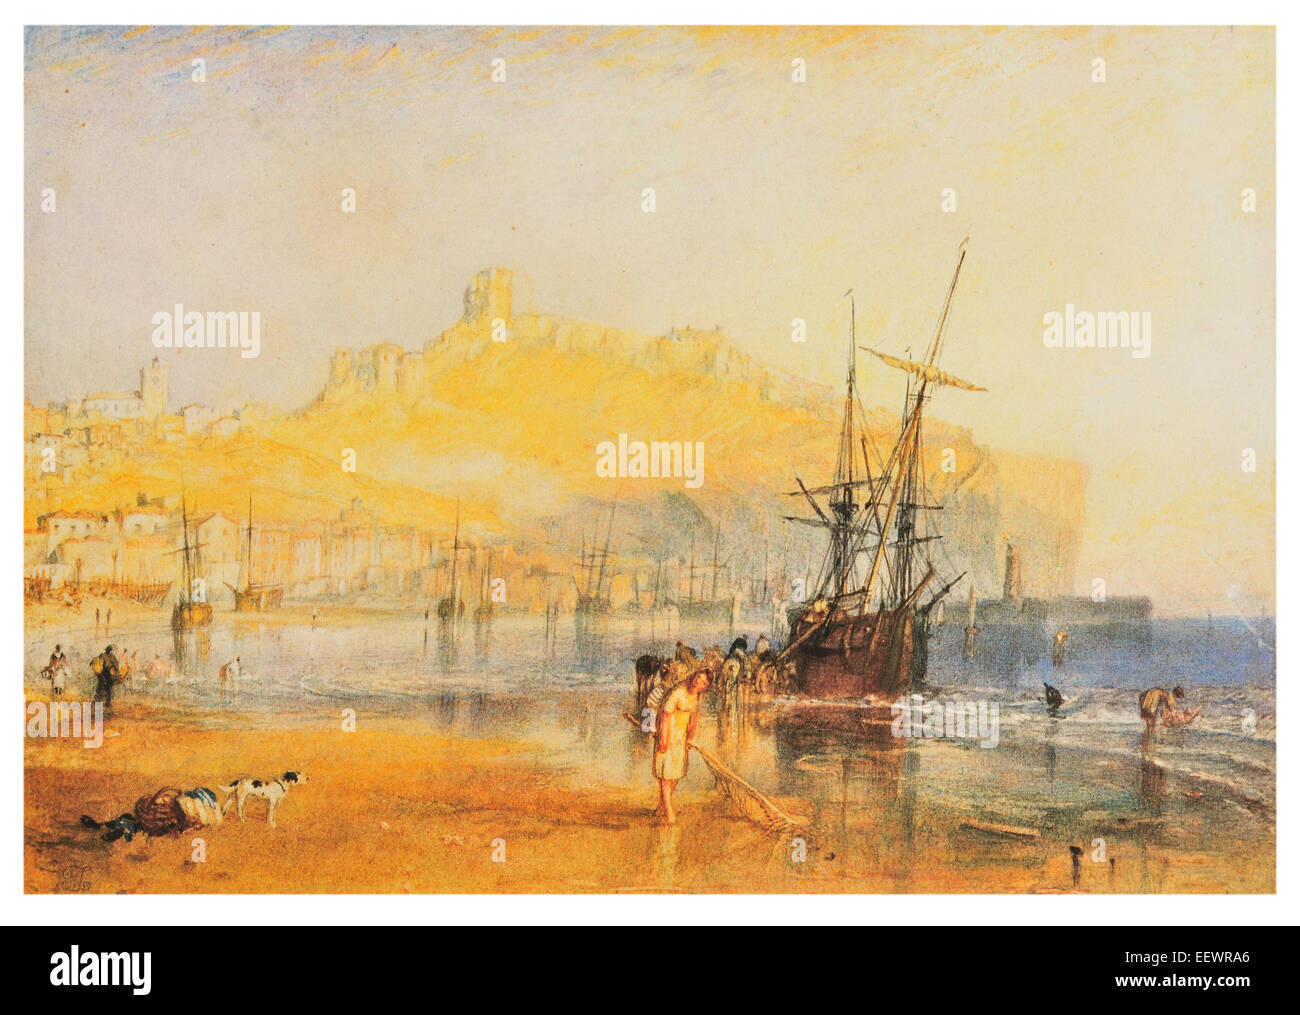 Scarborough by Joseph Mallord William Turner shrimp shrimper beach cove harbour fishing fishing boat Castle fort cliff cliffs Stock Photo